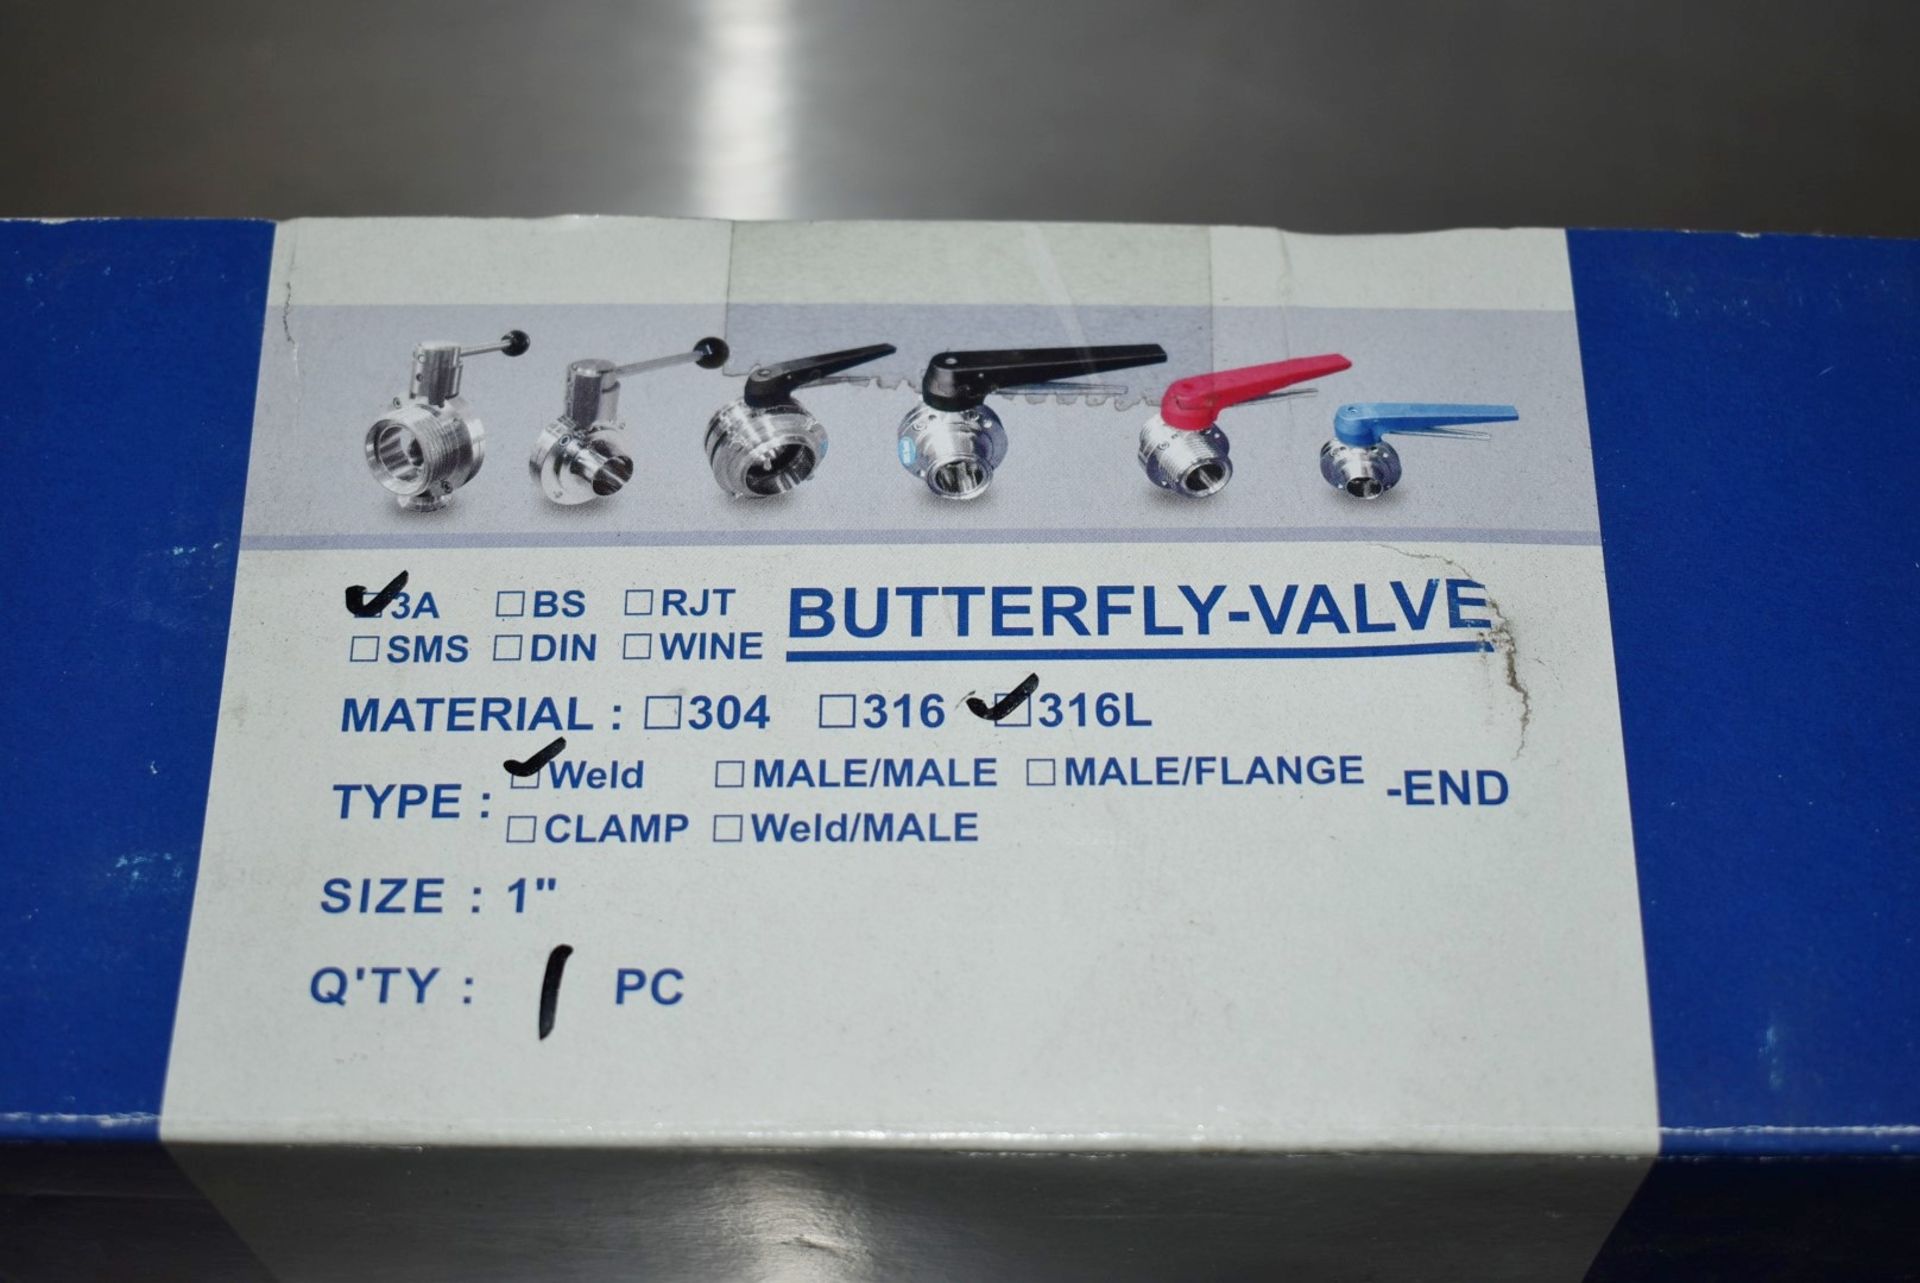 1 x Butterfly Valve - New in Original Box - Model: 3A - Material: 316L - Type: Weld - Size: 1 Inch - - Image 2 of 6